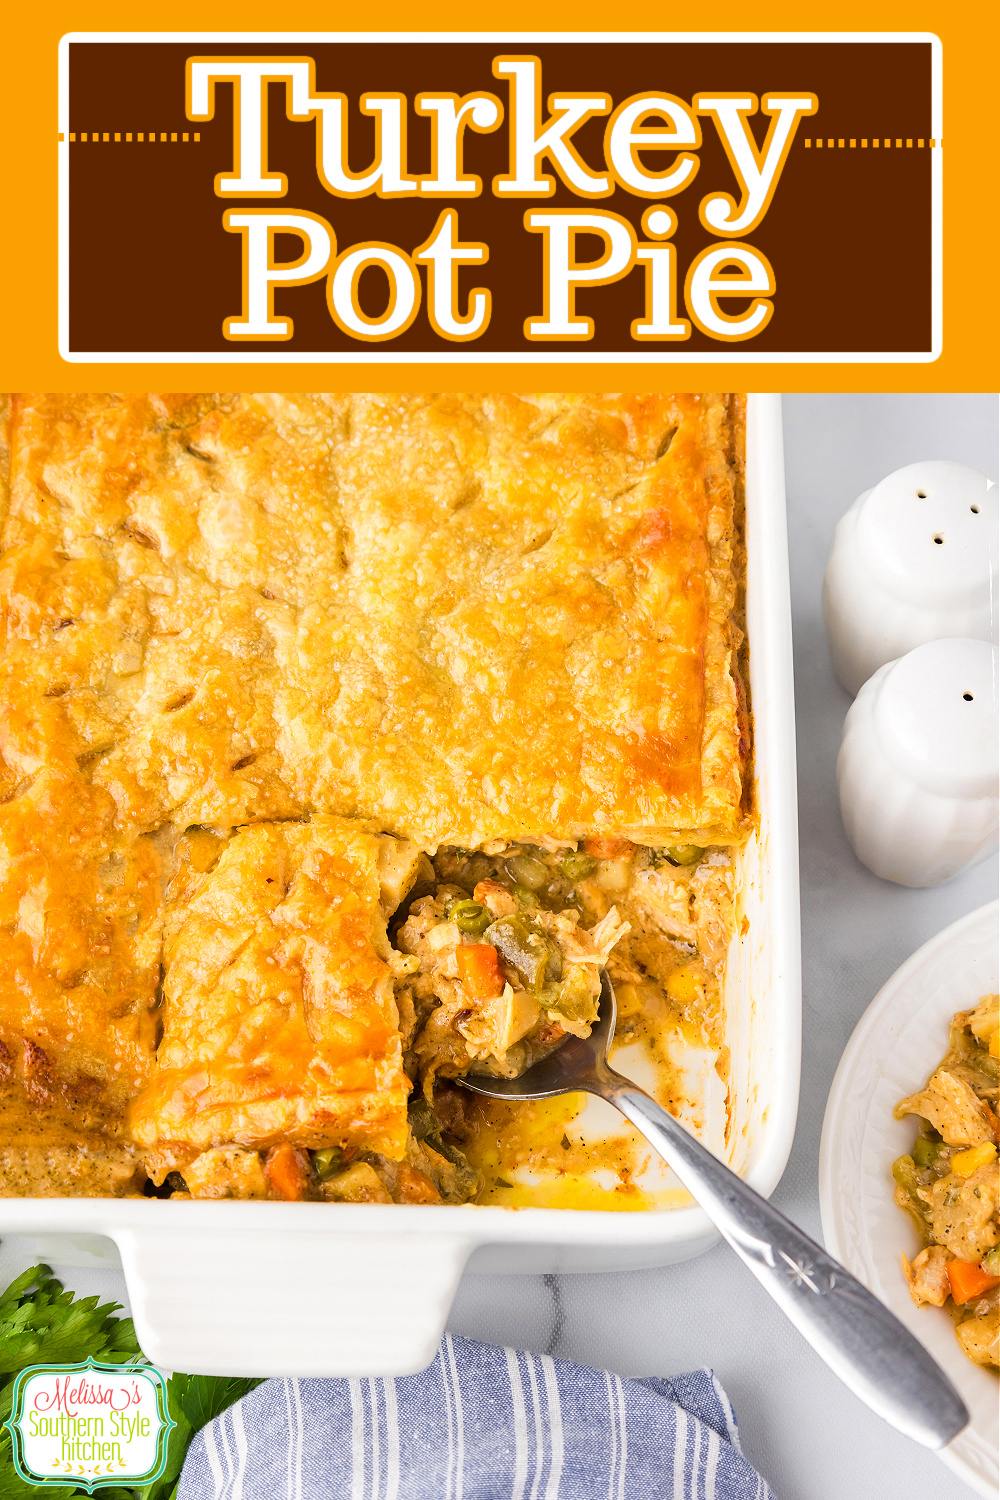 This Turkey Pot Pie recipe features a puff pastry crust making it a tasty way to use leftover turkey from the holidays or chicken all year. #turkeyrecipes #leftoverturkey #potpie #chickenpotpie #turkeypotpie #puffpastryrecipes via @melissasssk